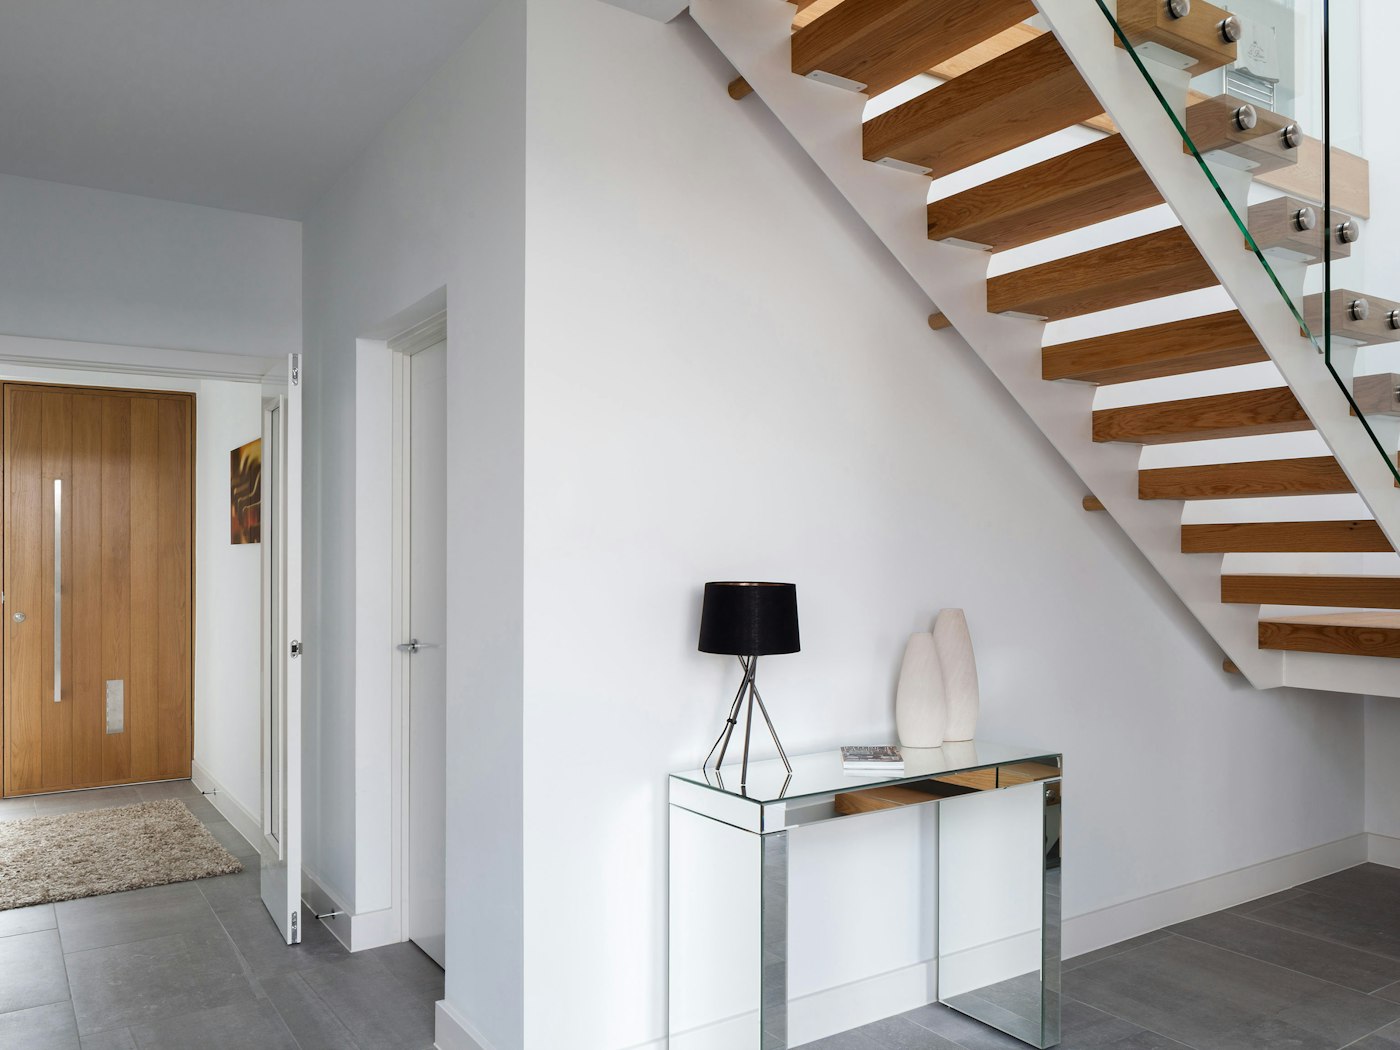 Matching your front door to the staircase is not uncommon in contemporary houses